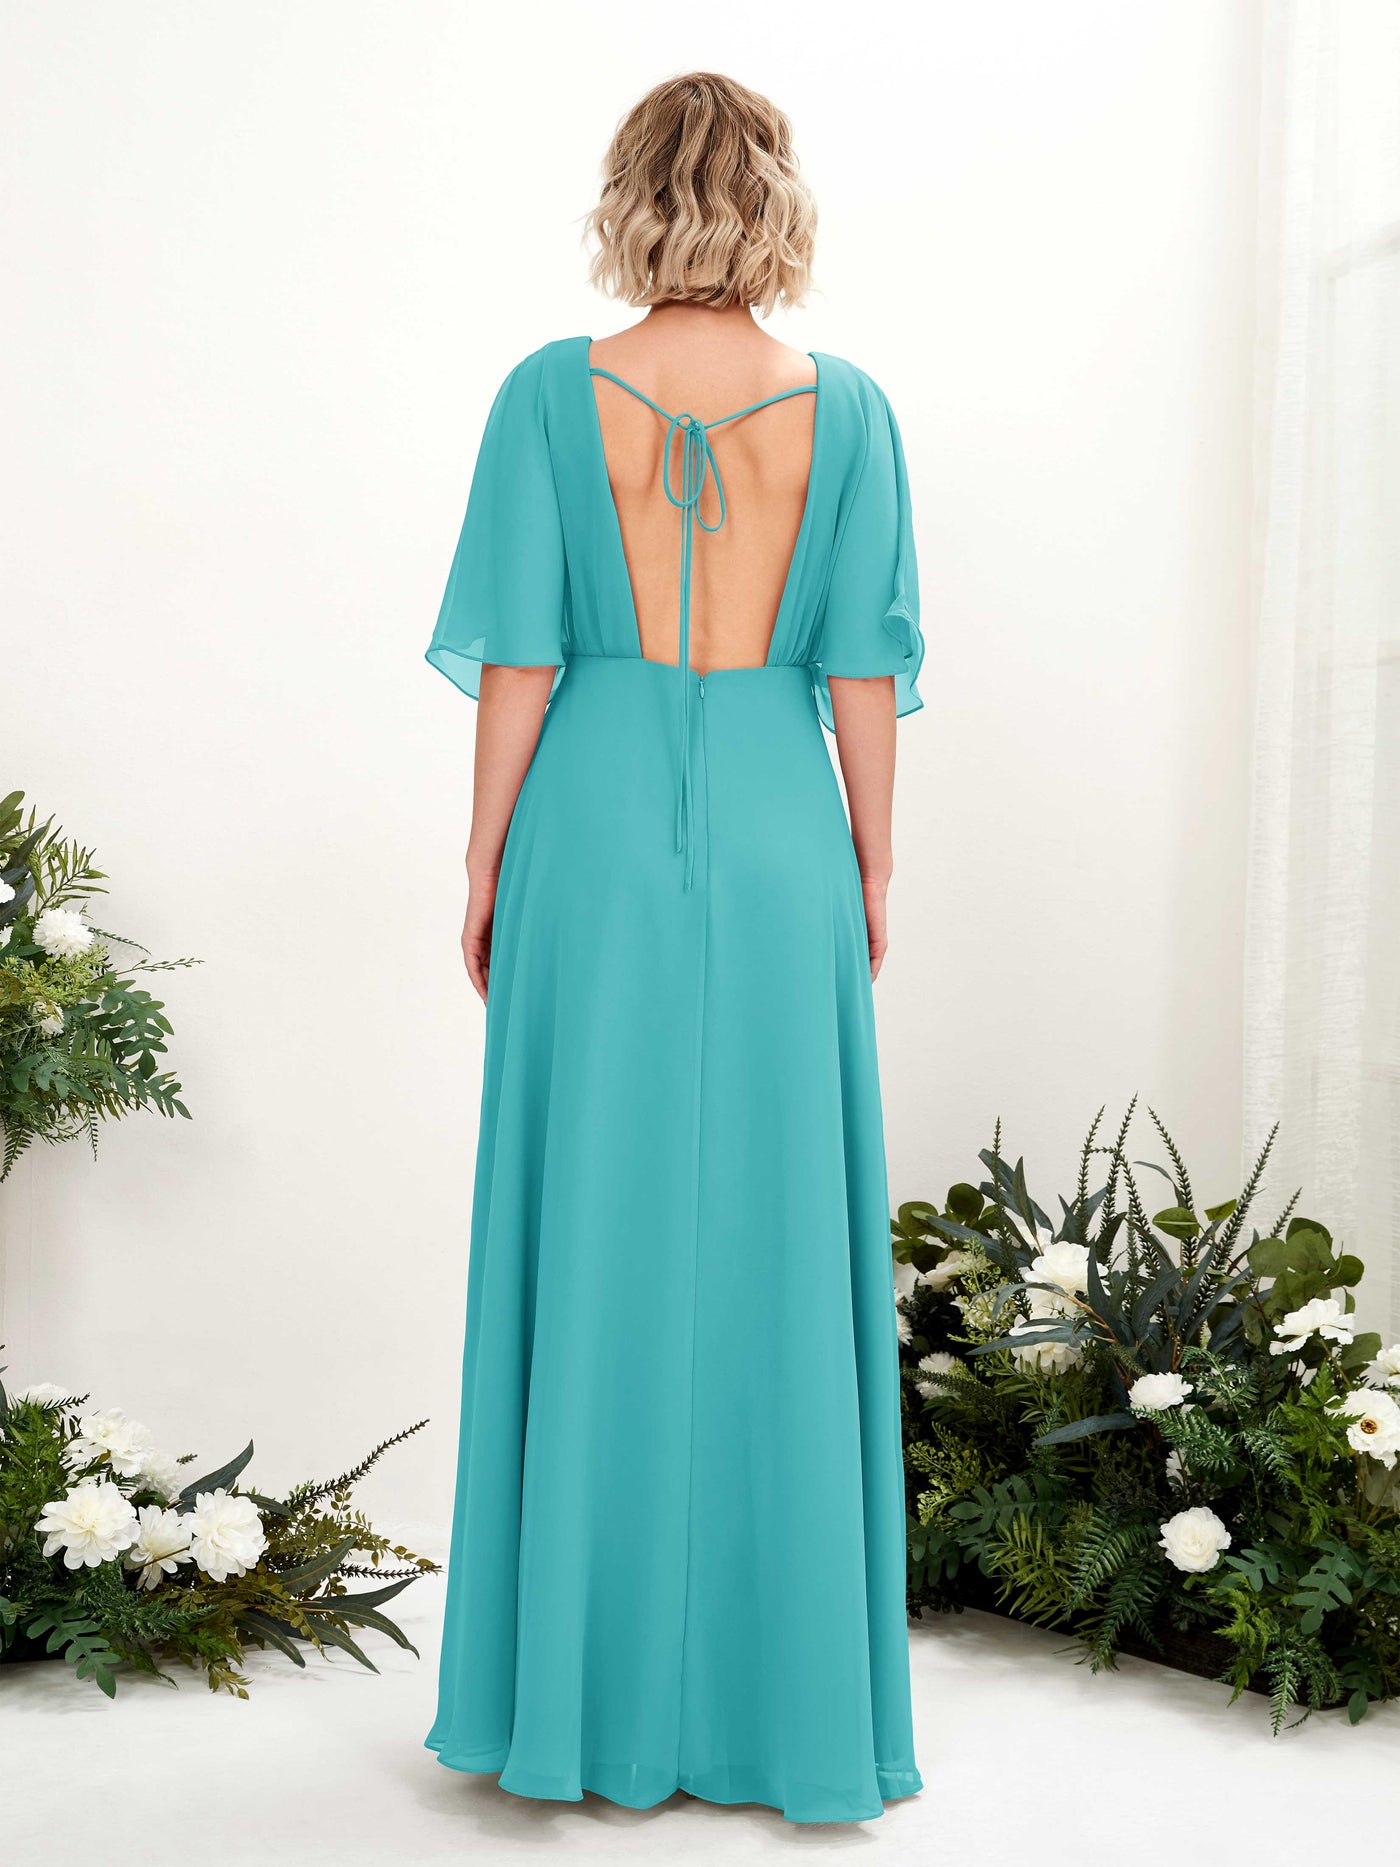 Turquoise Bridesmaid Dresses Bridesmaid Dress A-line Chiffon V-neck Full Length Short Sleeves Wedding Party Dress (81225123)#color_turquoise